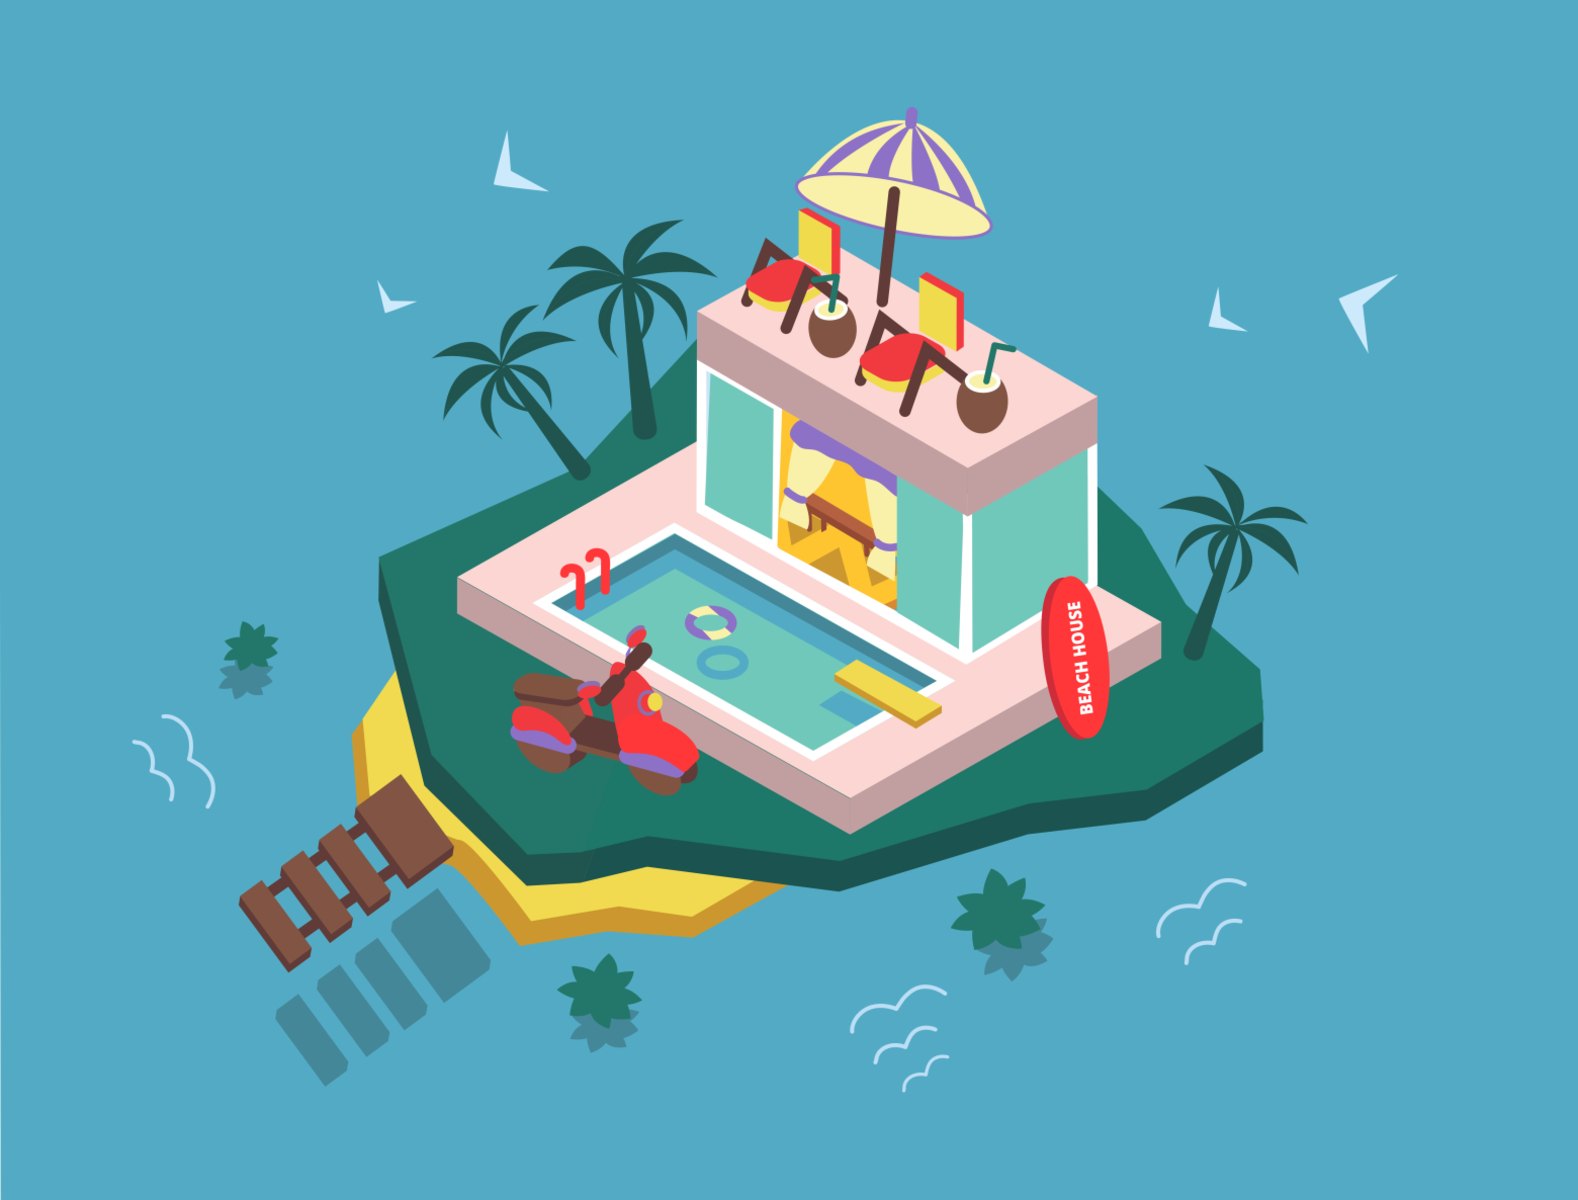 Villa in Bali isometric style asia asian bali balinese beach design house illustration isolated isometric isometry relax sea surfing swimming tour tourism travel vector villa